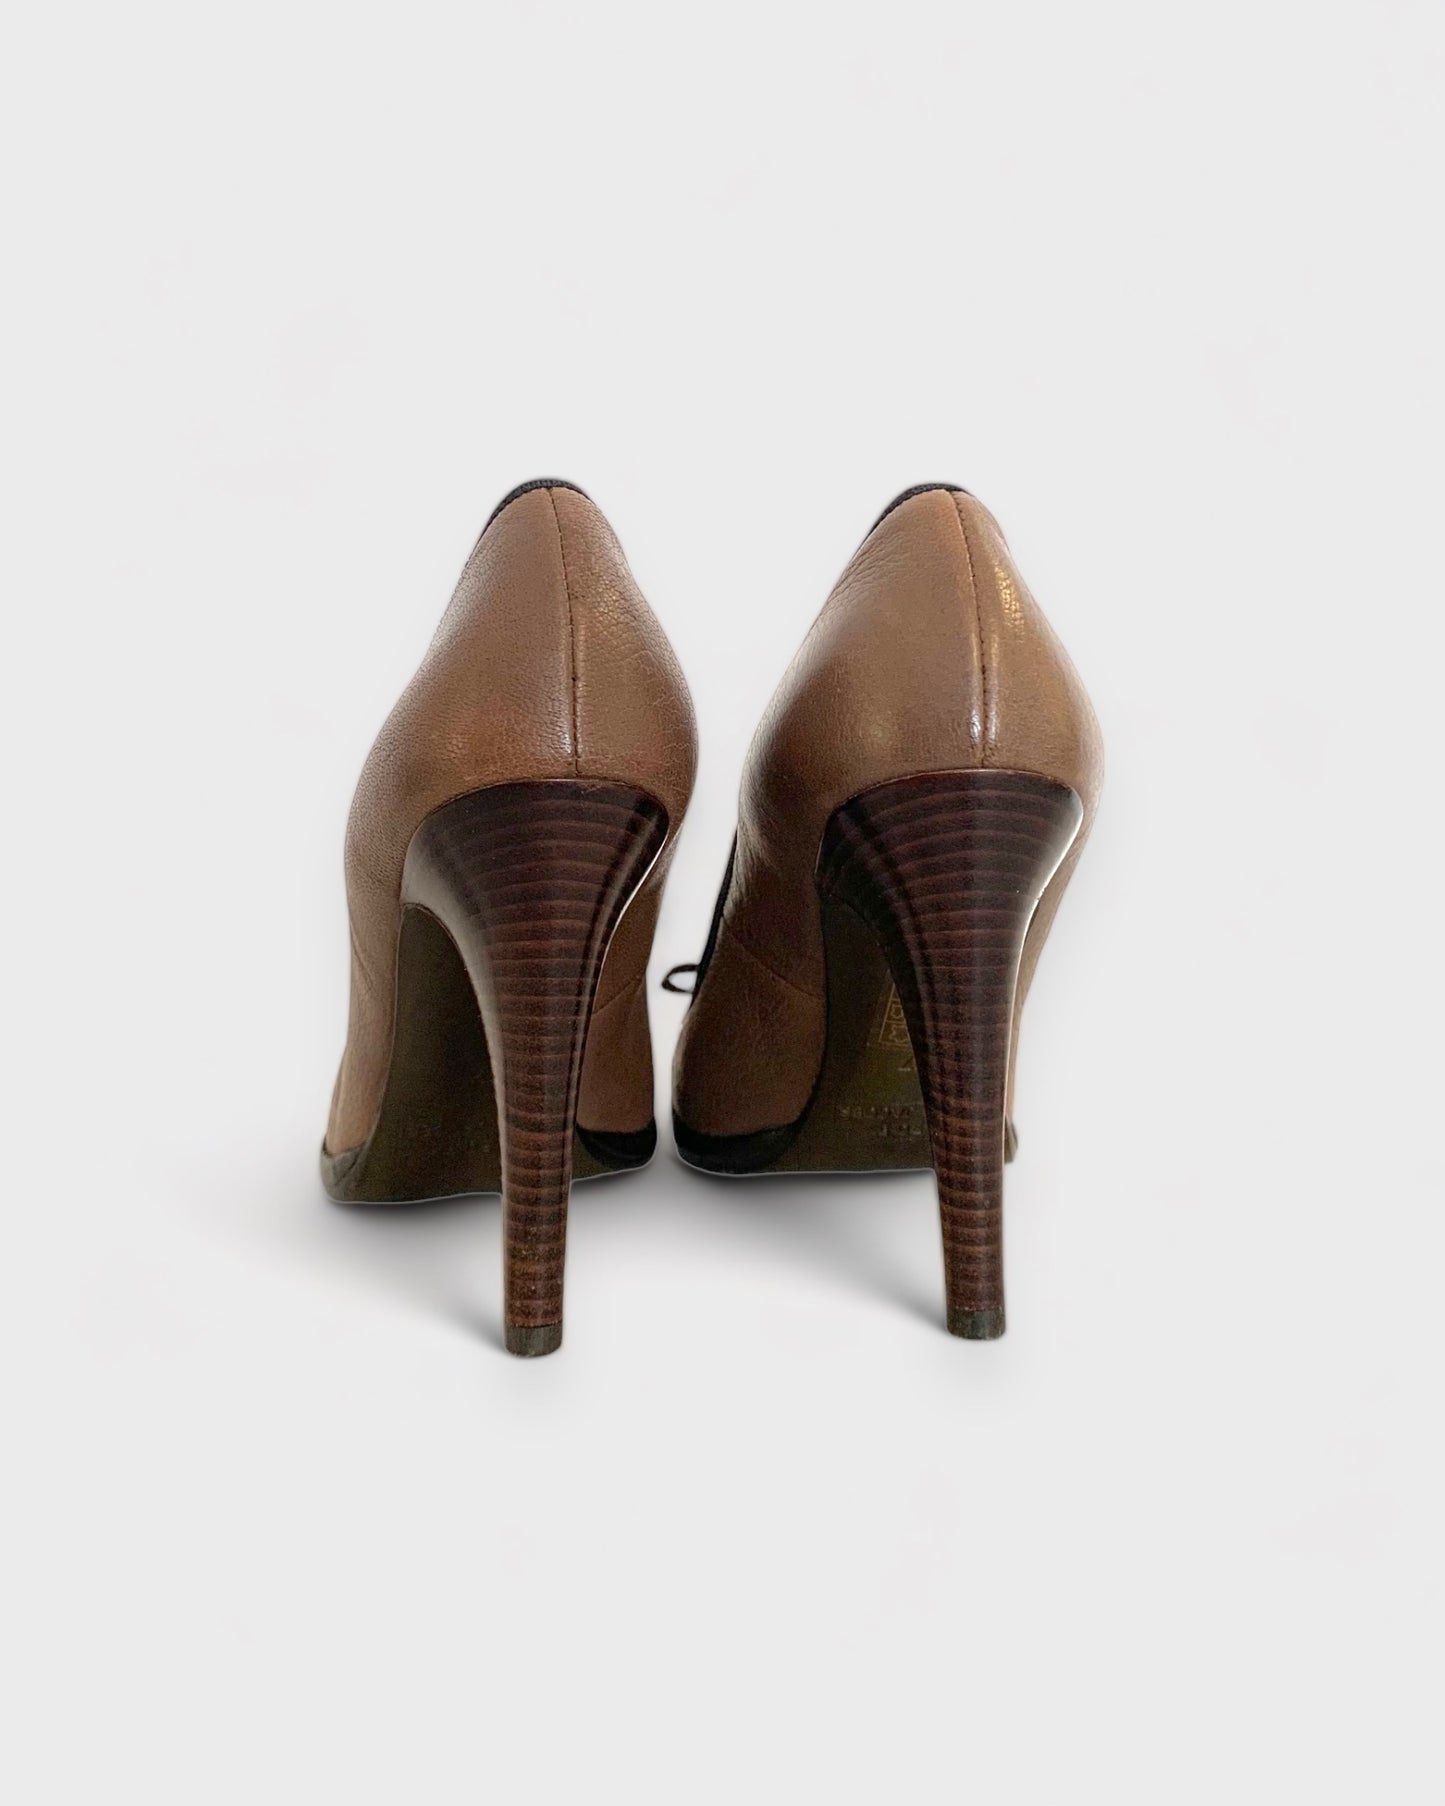 Marc by Marc Jacobs leather pump